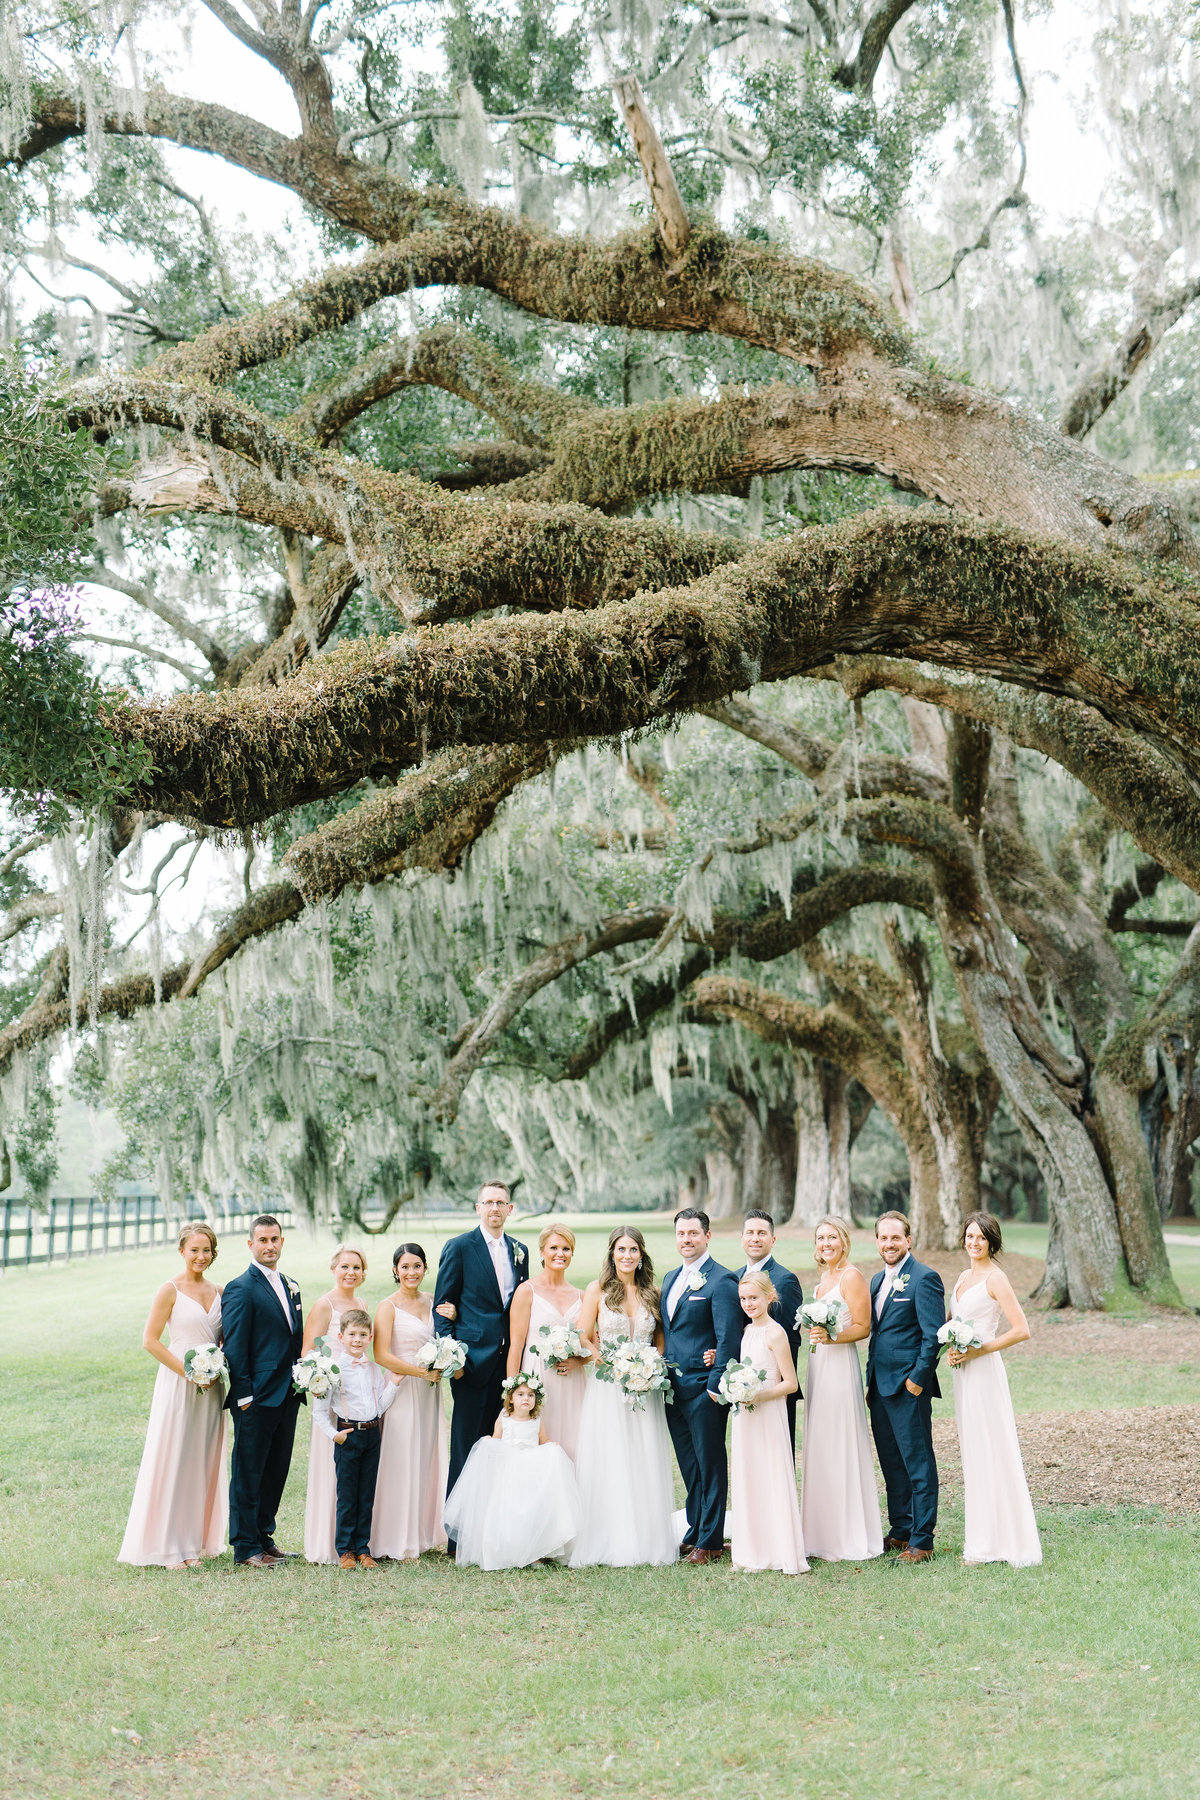 Wedding Party at Boone Hall Plantation Bridesmaids in Blush Pink Dresses and Groomsmen in Navy Blue Suits